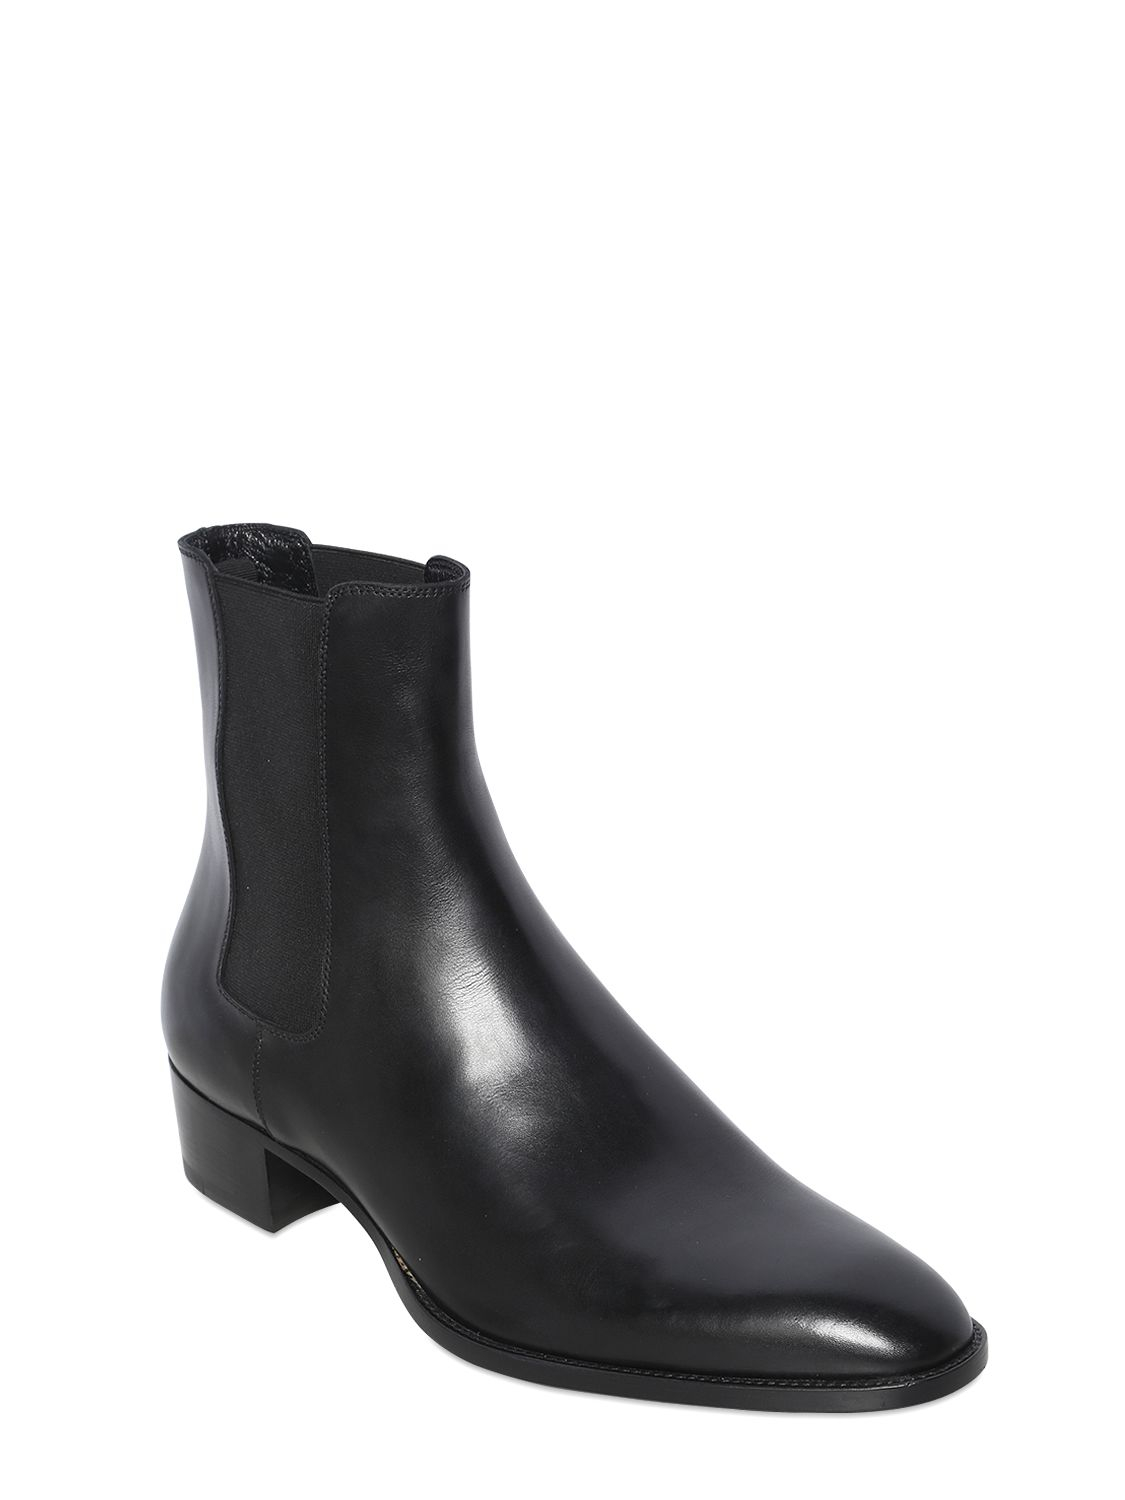 Saint Laurent 40mm Wyatt Leather Chelsea Cropped Boots in Black 